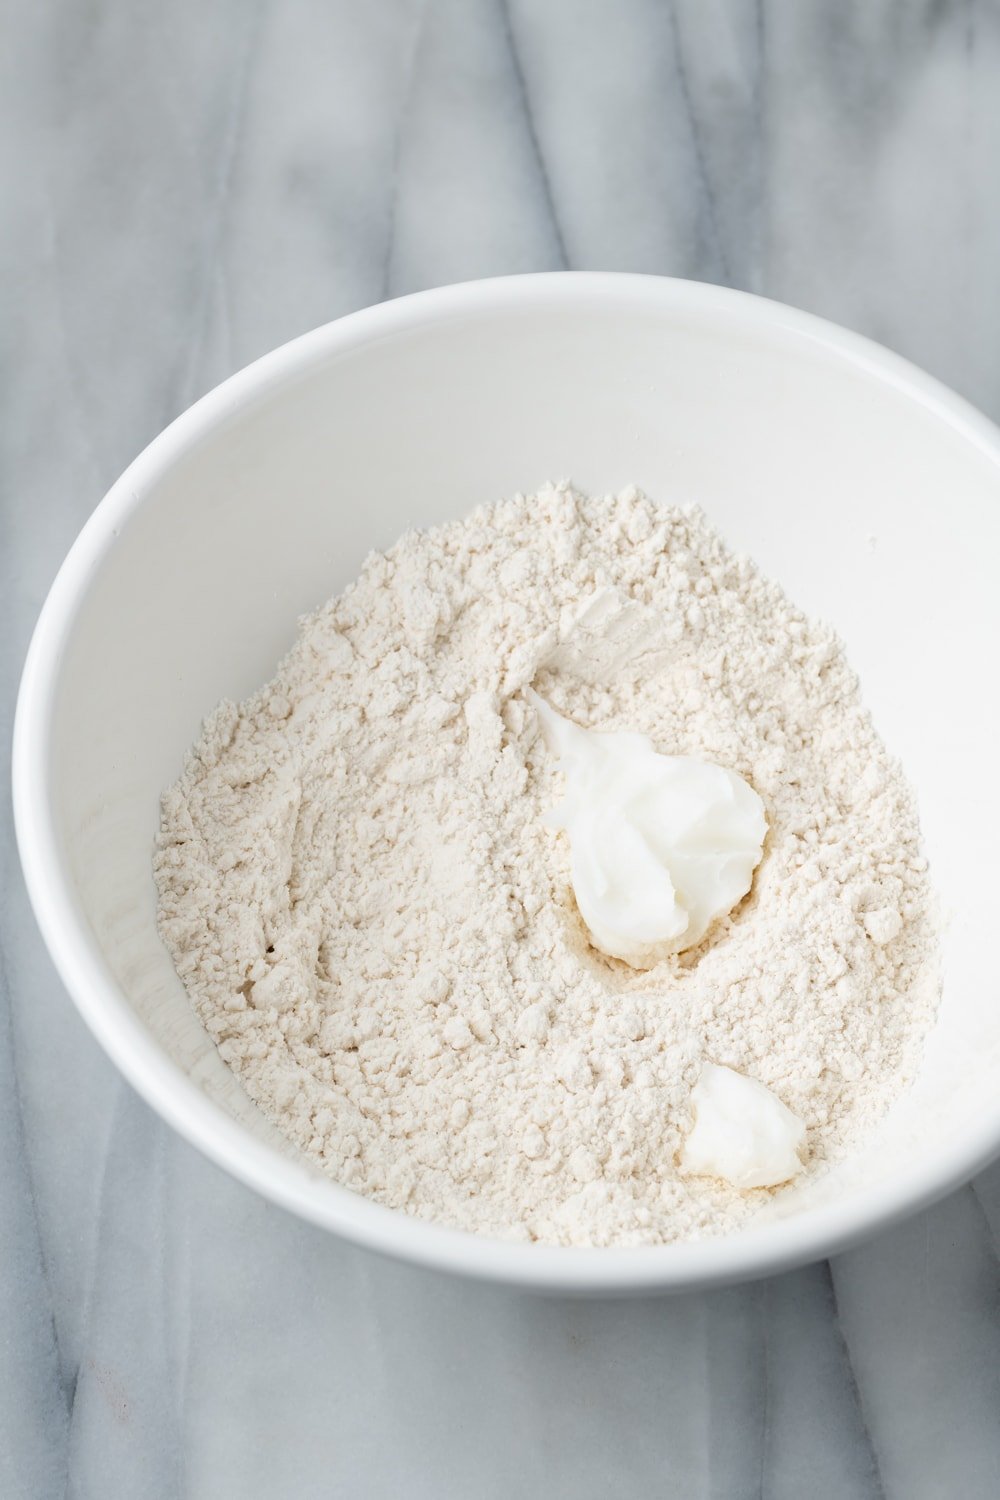 Flour, lard and salt in a white bowl before mixing for empanada dough